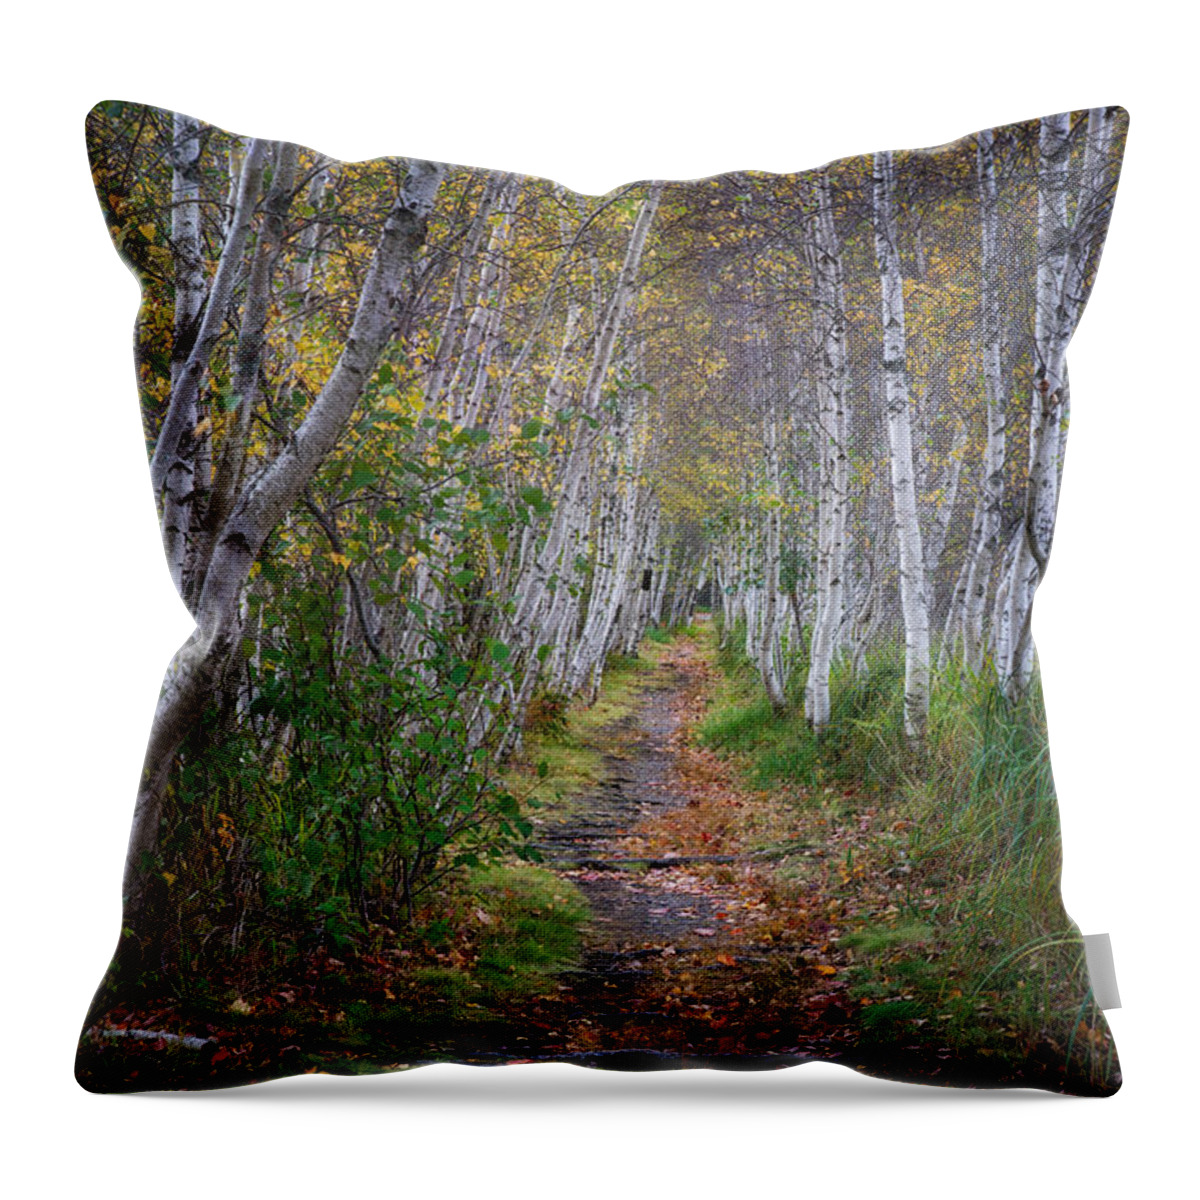 #acadia#fall#colors#landscape#maine#acadianationalpark#birchtree Throw Pillow featuring the photograph Birch Series no. 4 by Darylann Leonard Photography